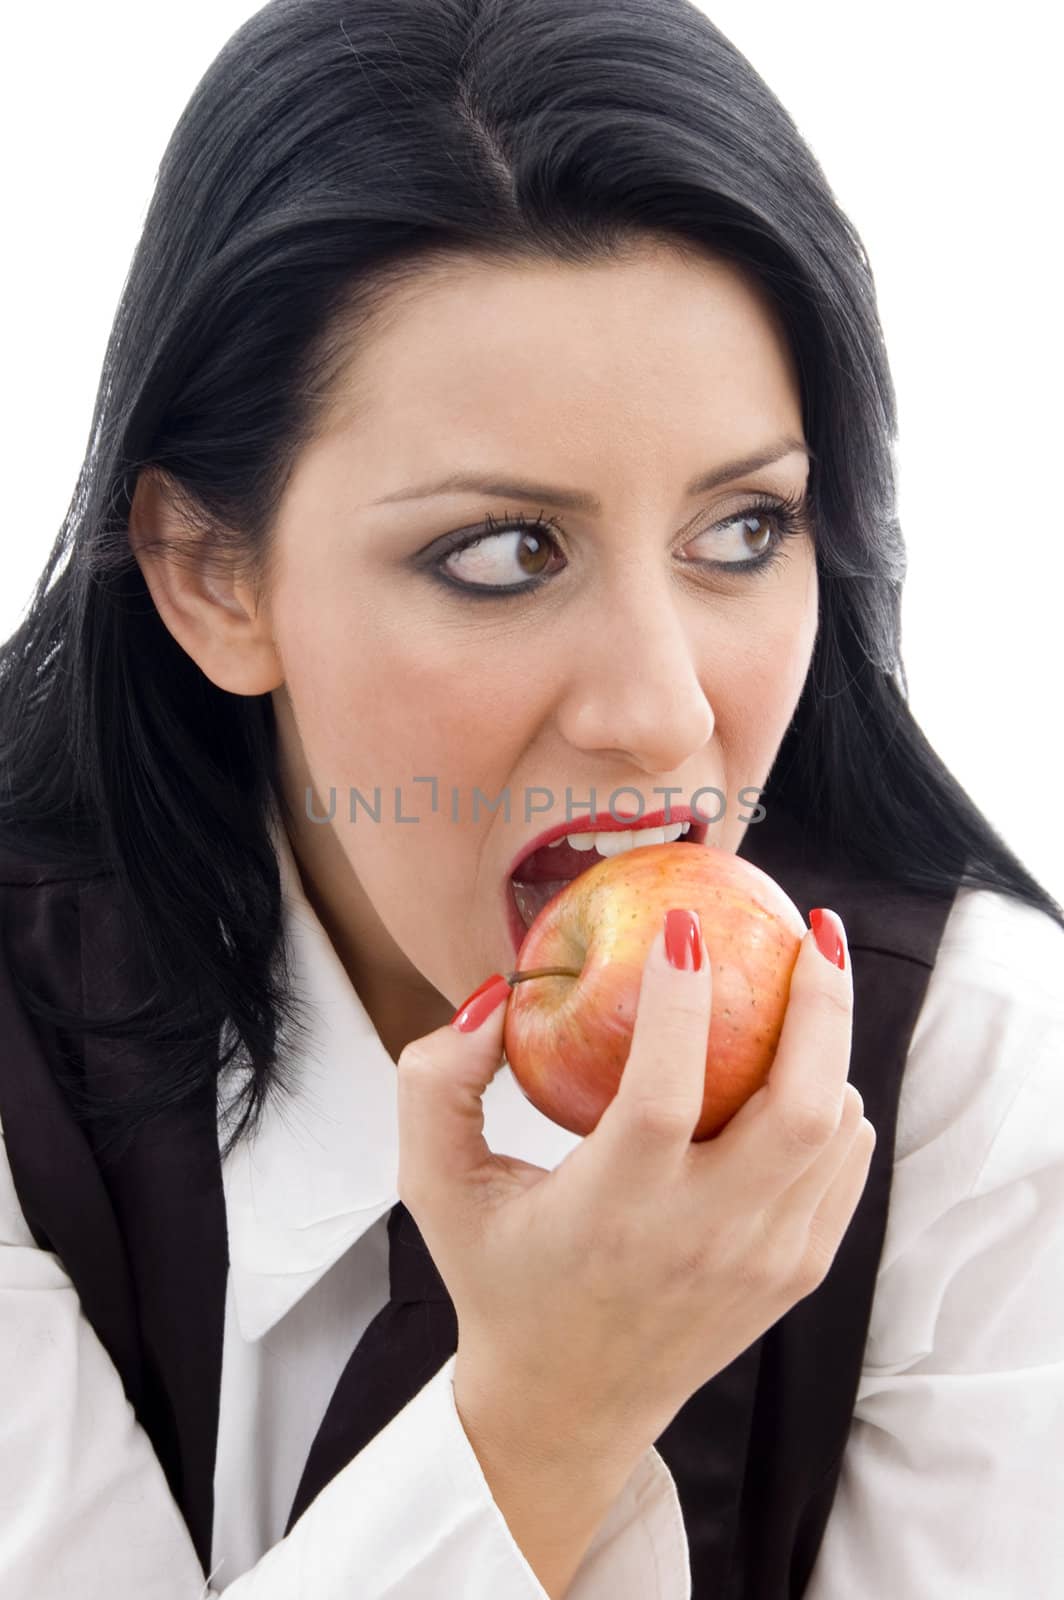 woman eating an apple by imagerymajestic